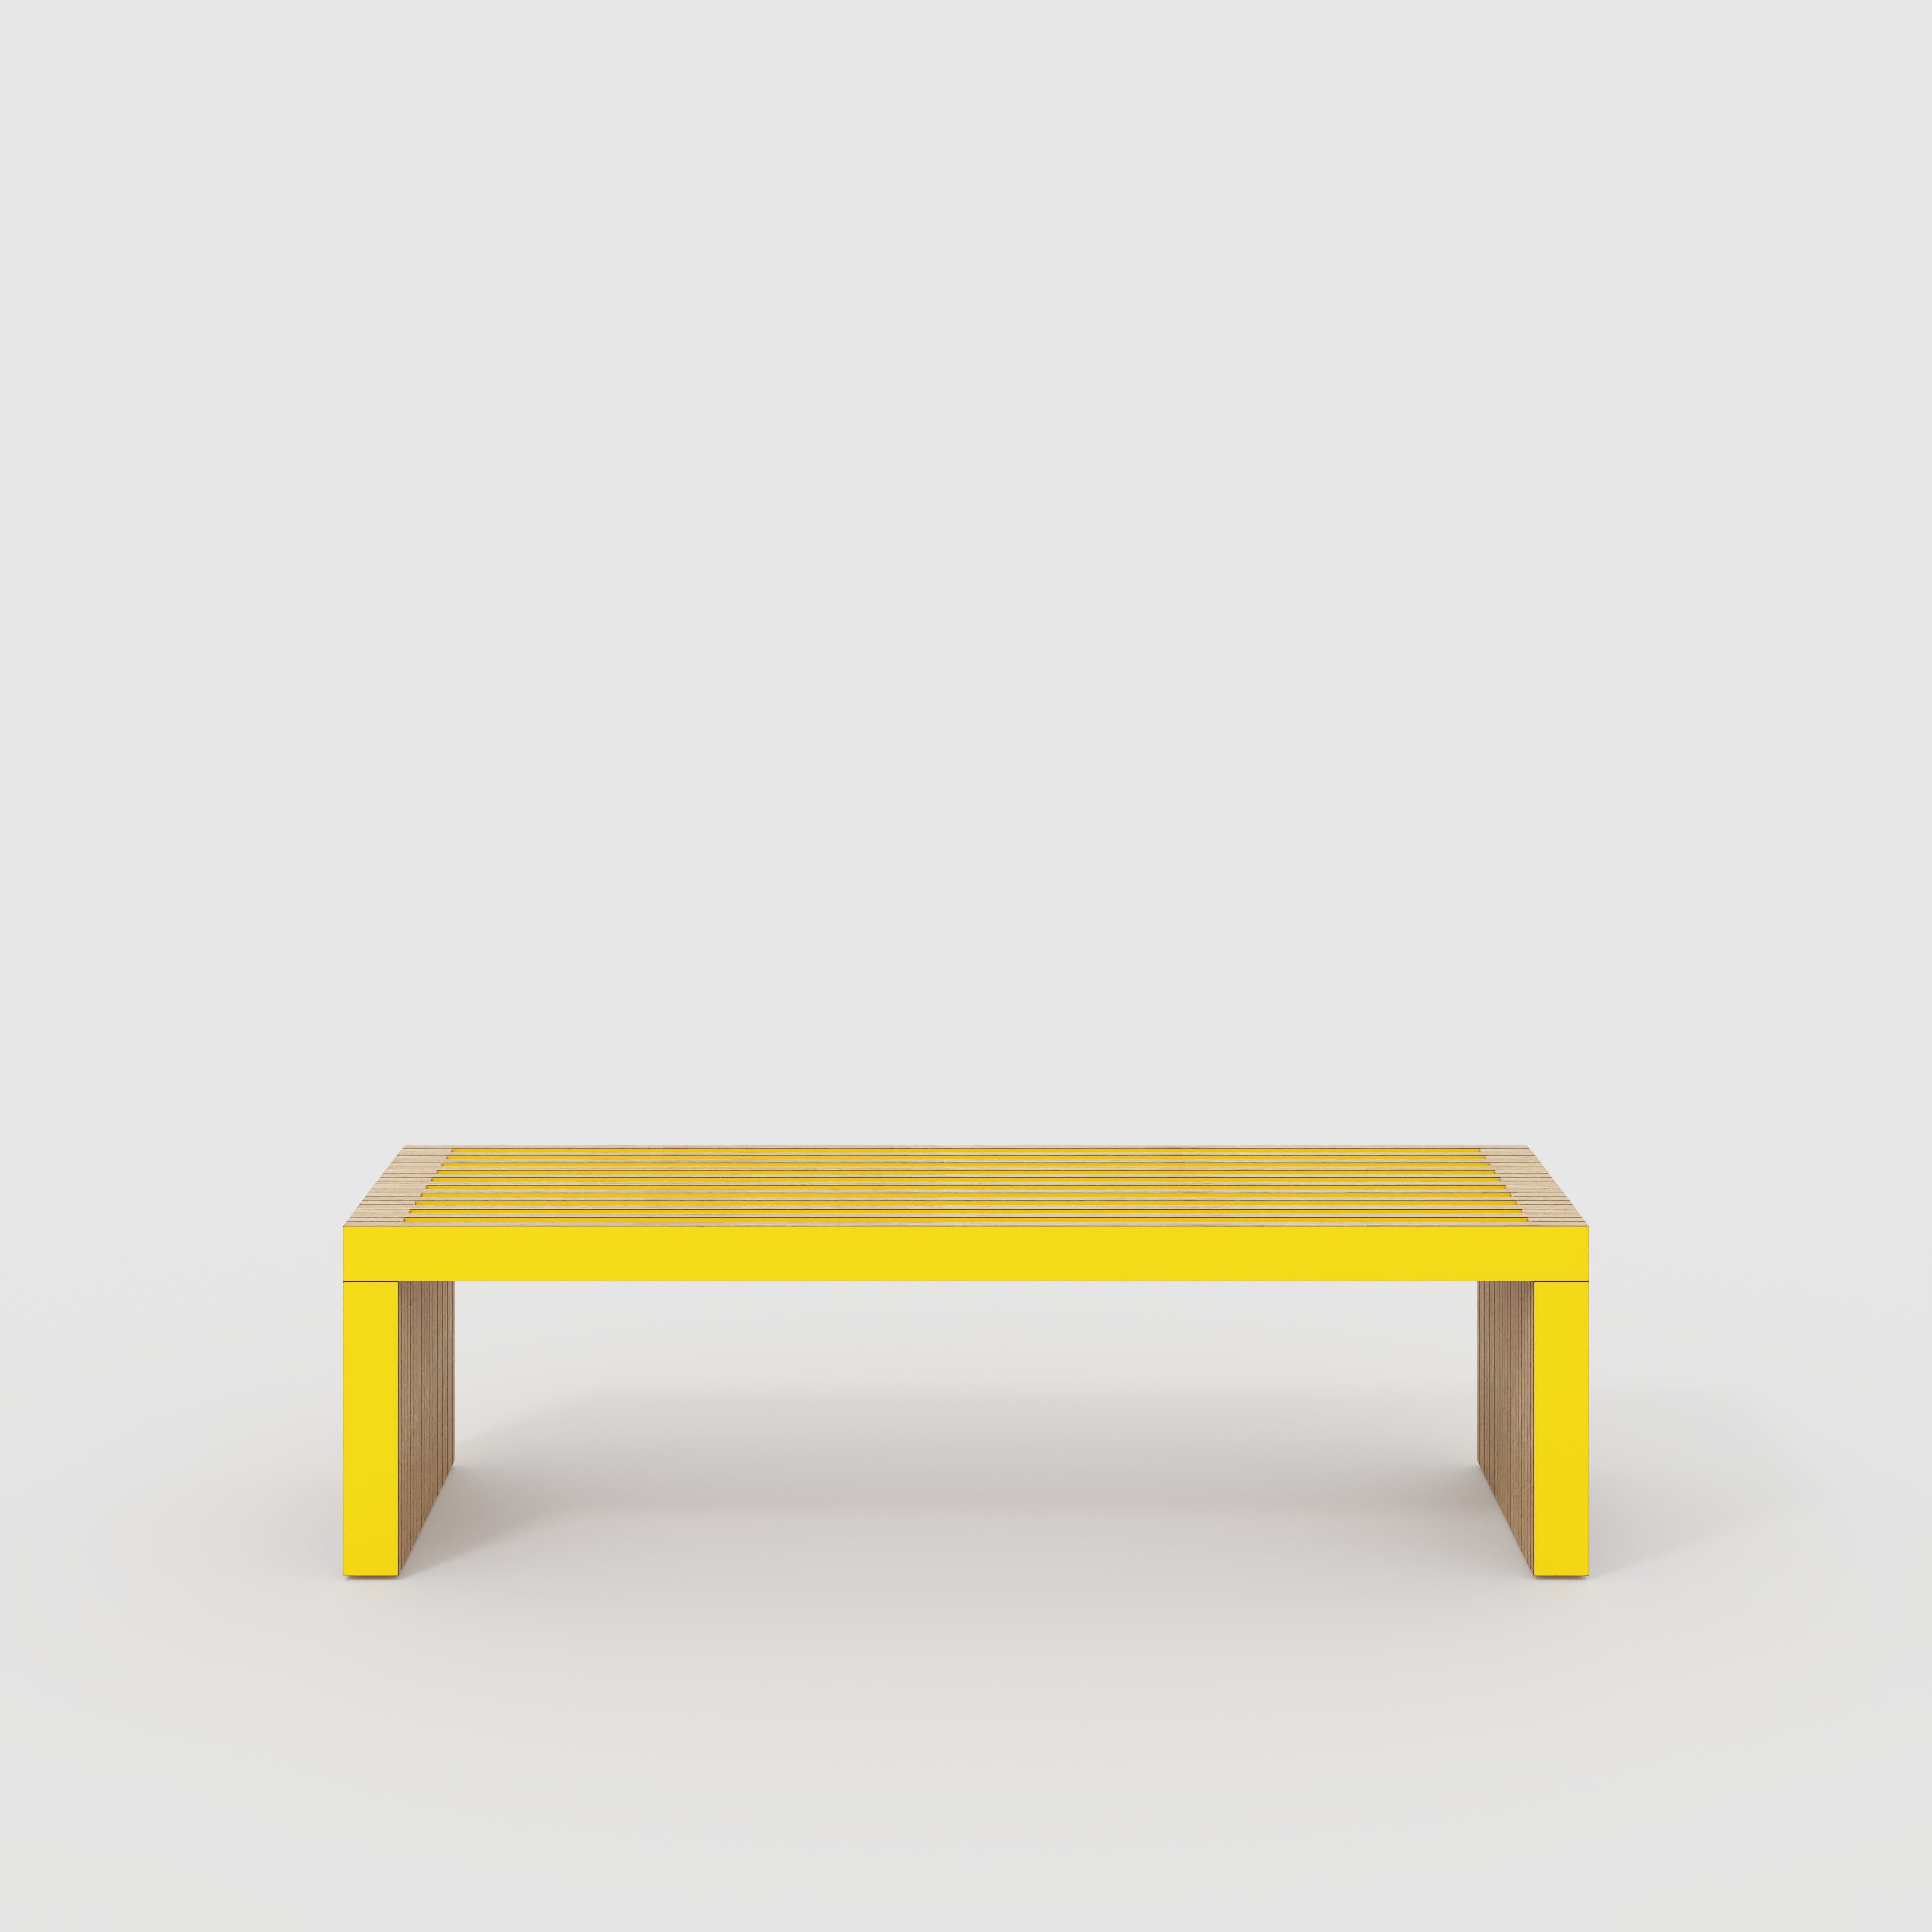 Bench Seat with Slats - Formica Chrome Yellow - 1600(w) x 410(d) x 450(h)